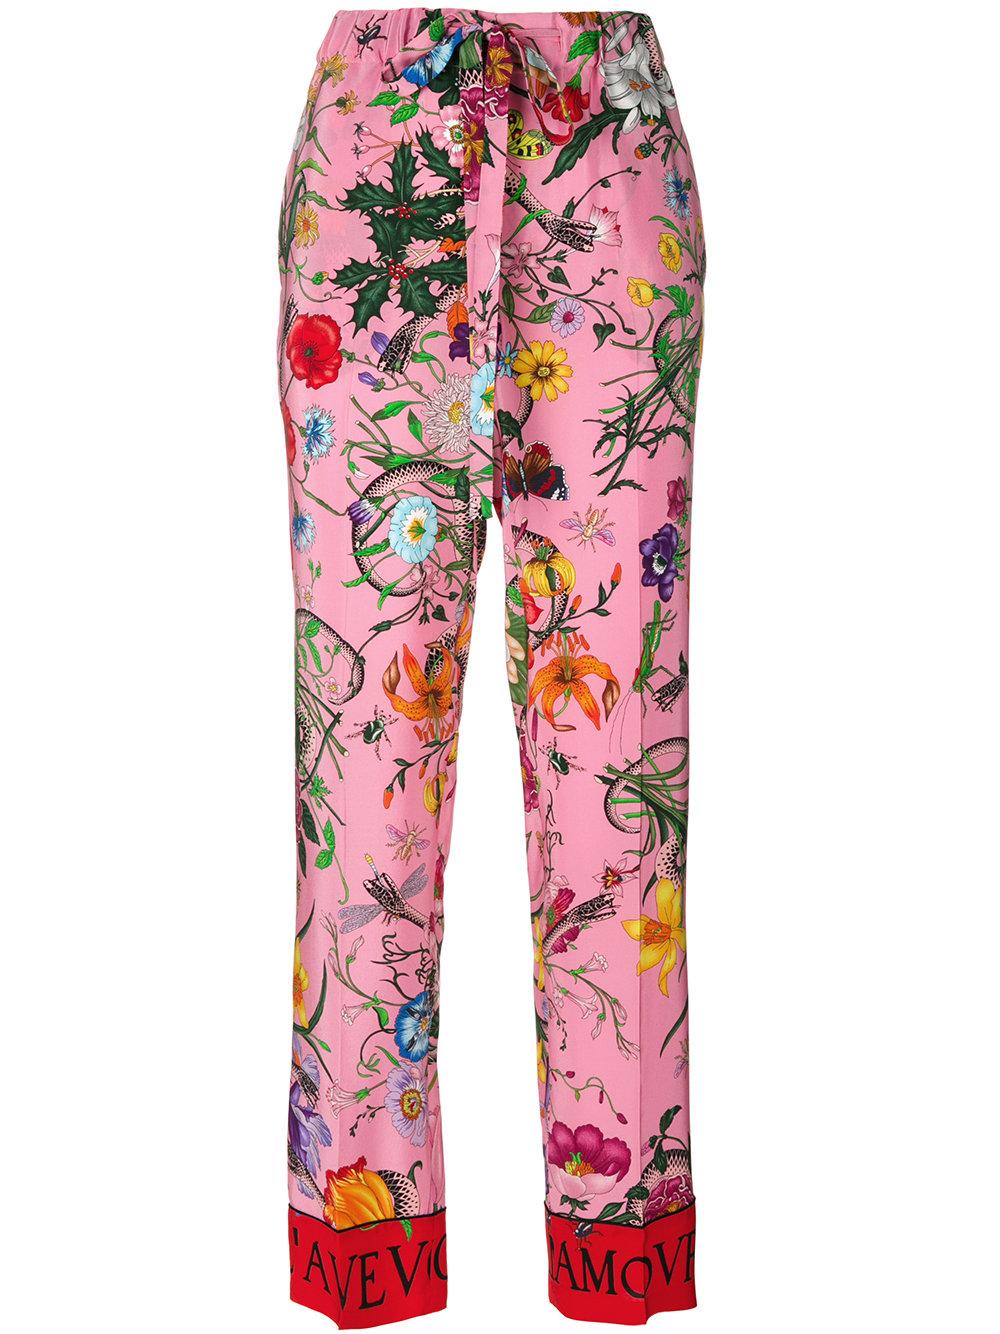 Lyst - Gucci Pyjama Style Floral Trousers in Pink